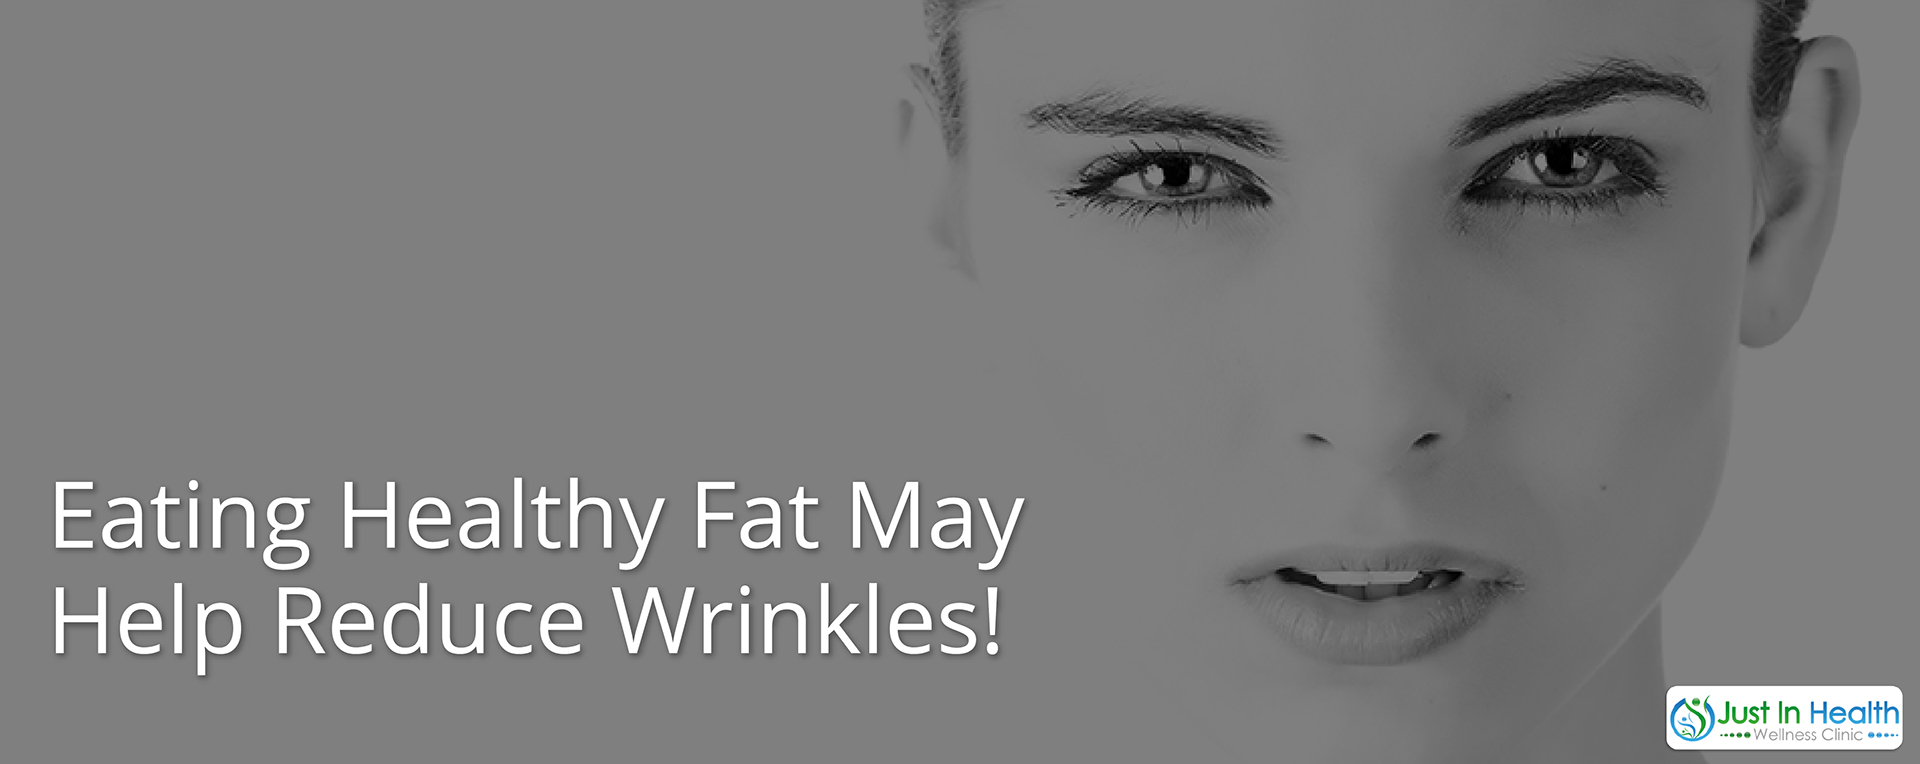 Eating Healthy Fat May Reduce Wrinkles